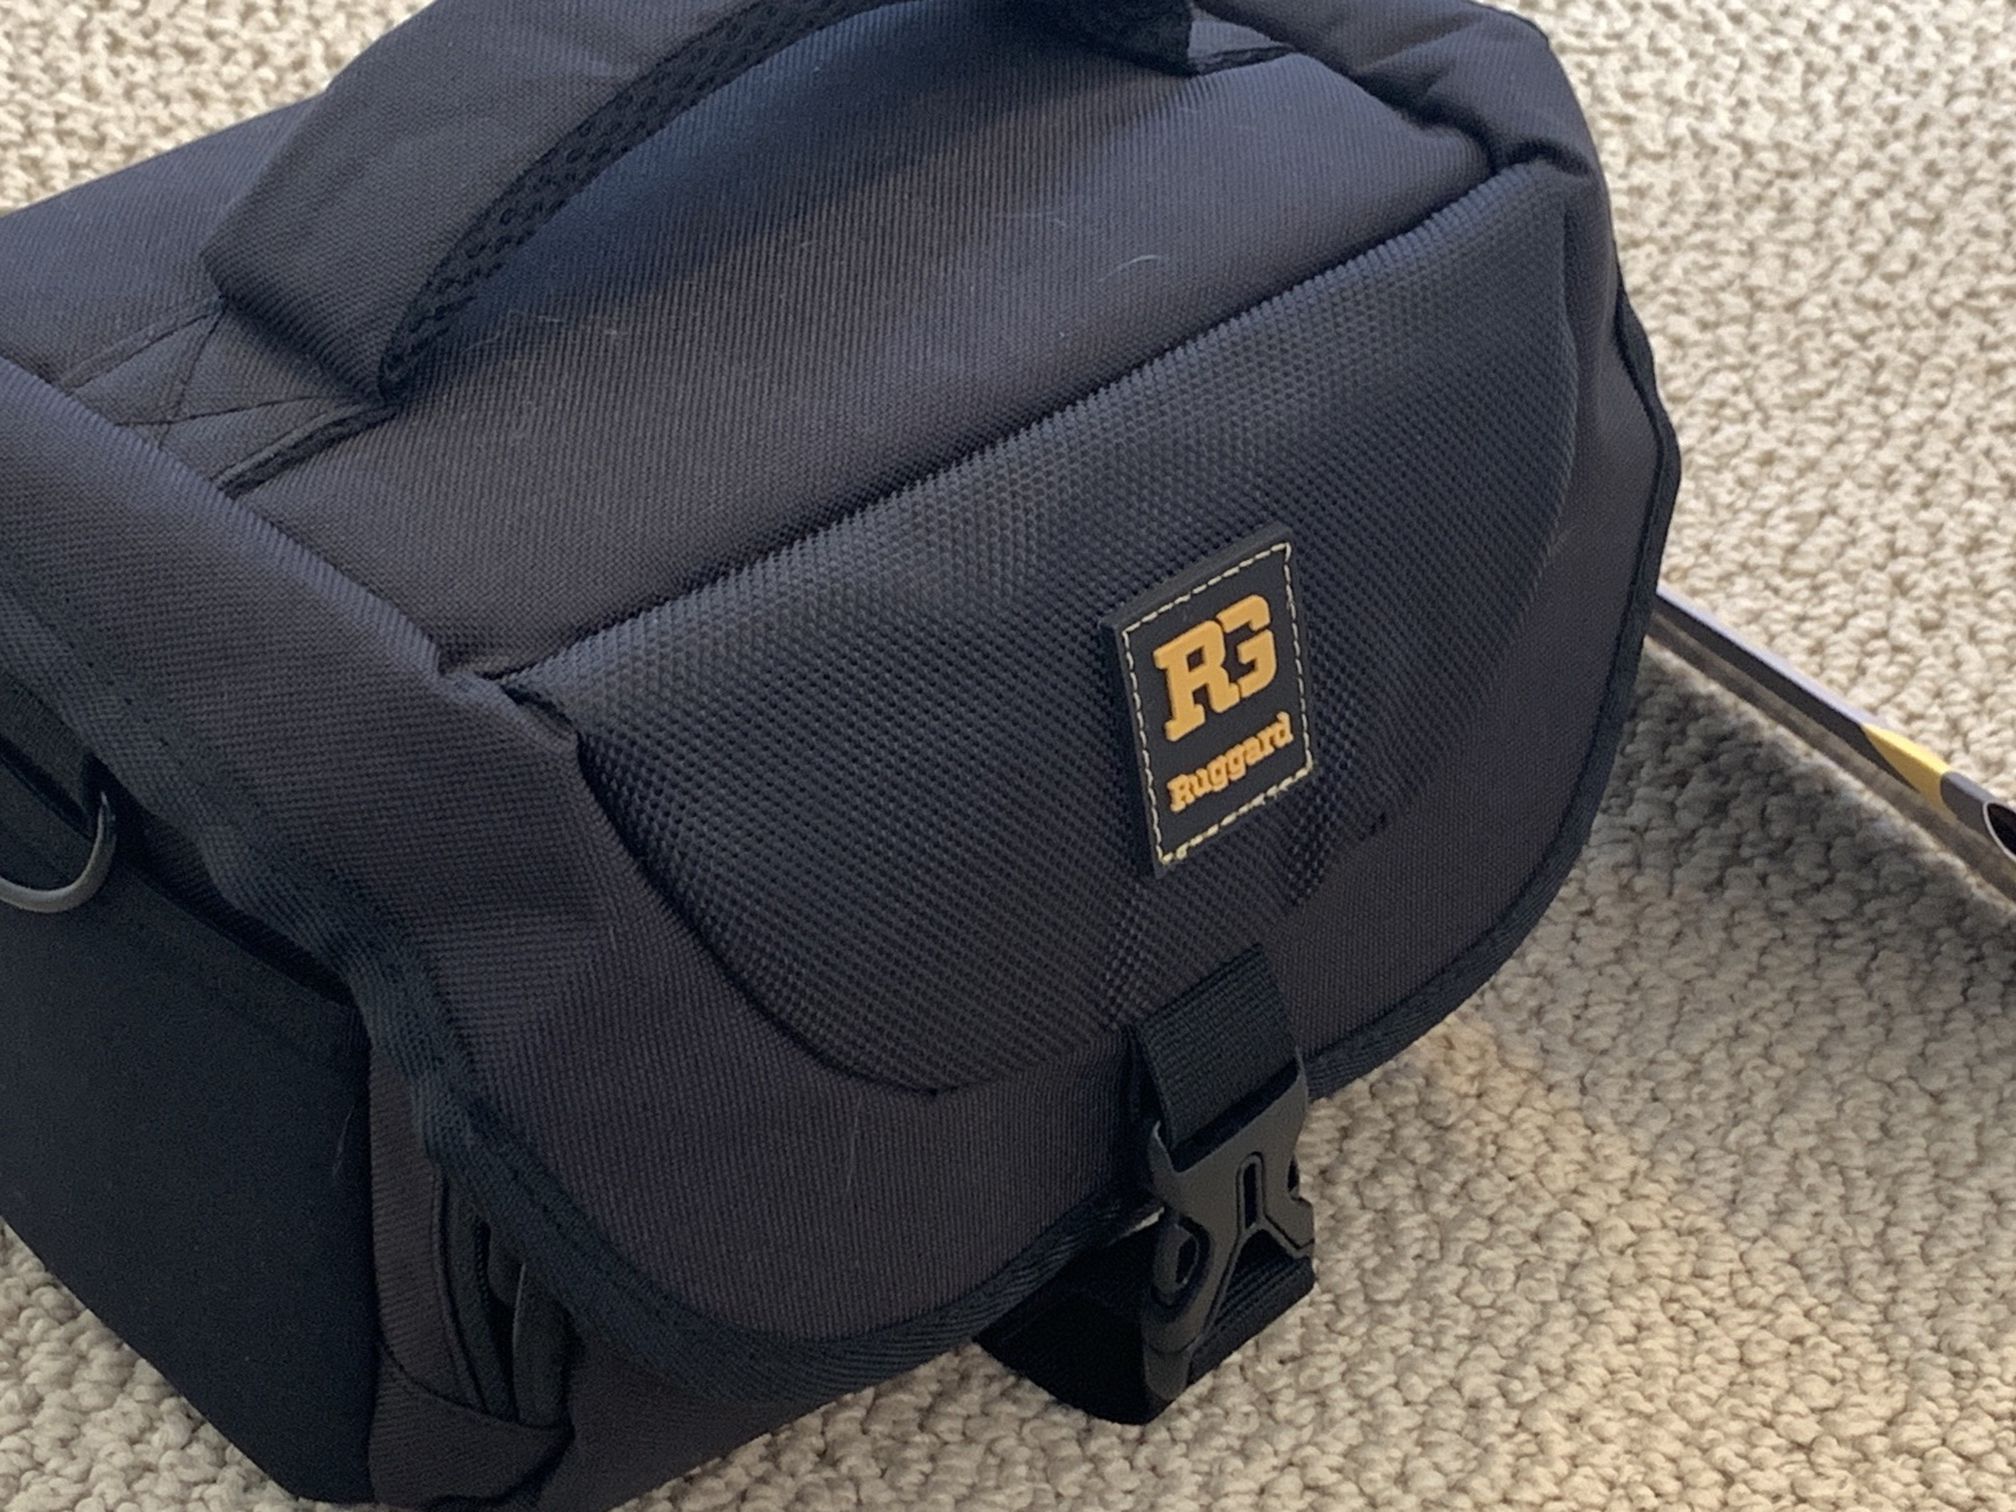 Camera bag - Ruggard Journey 24 (New With Tags)